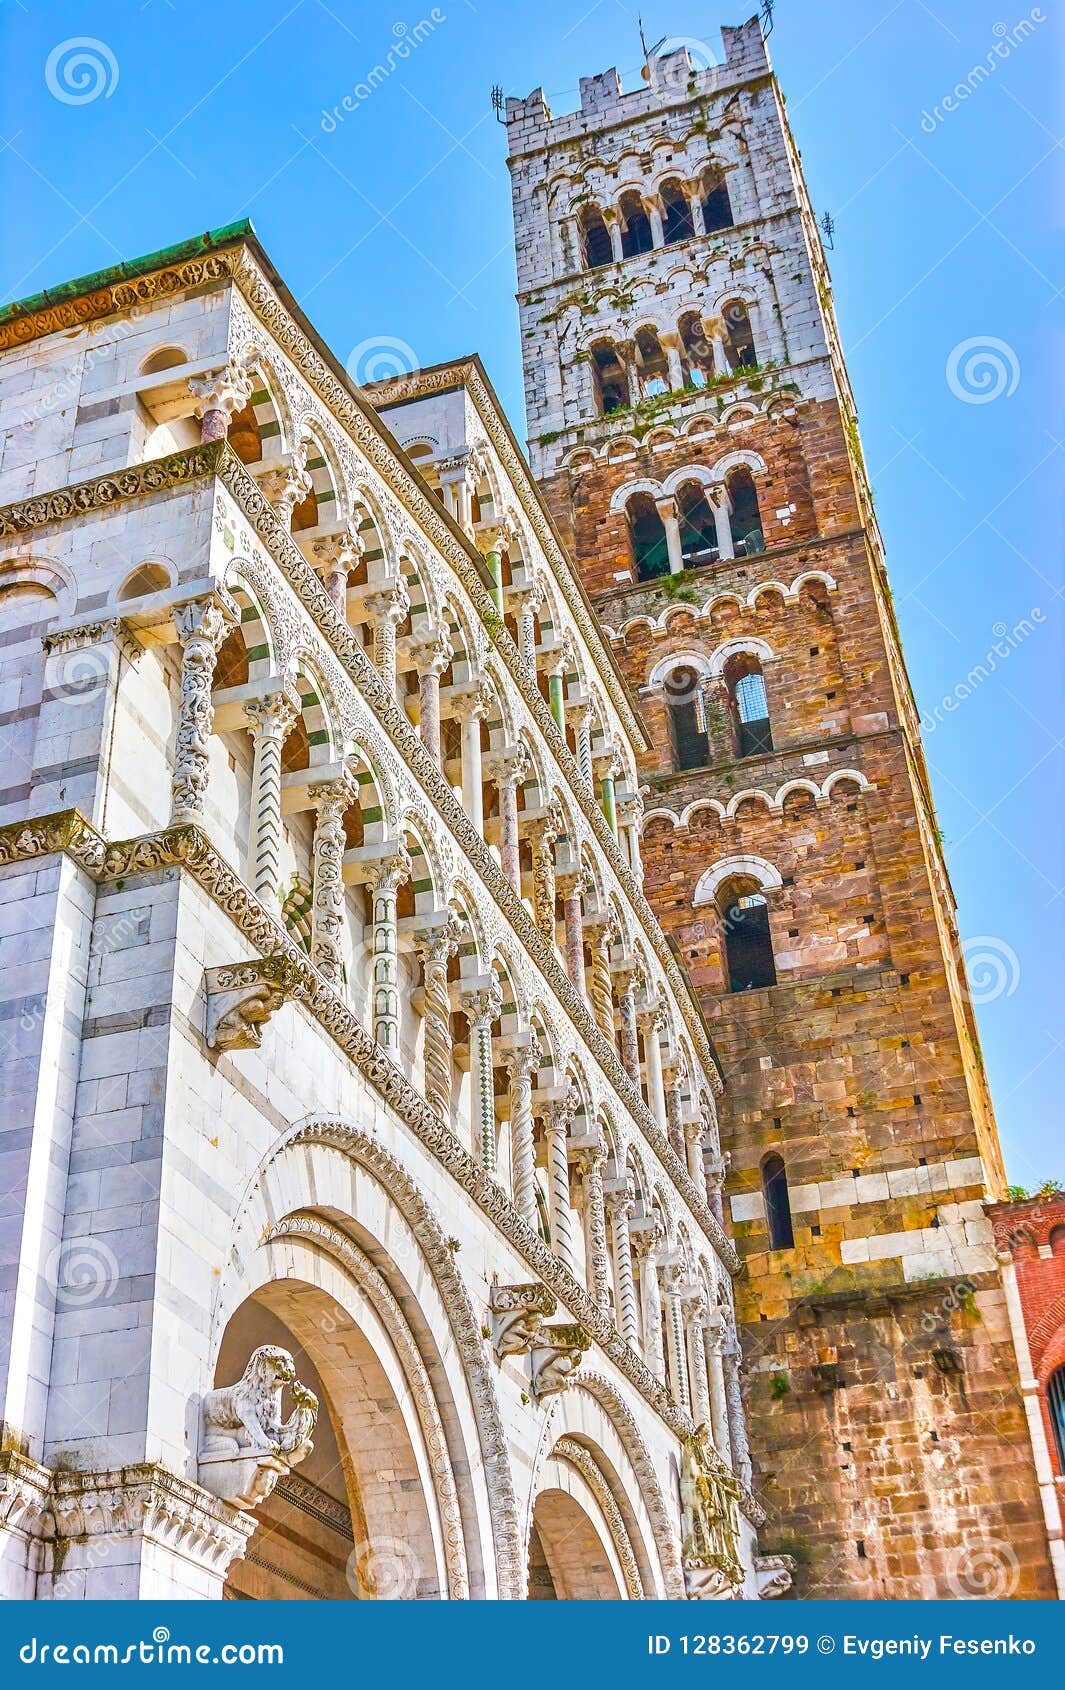 the frontage of saint martin of tours cathedral in lucca, italy